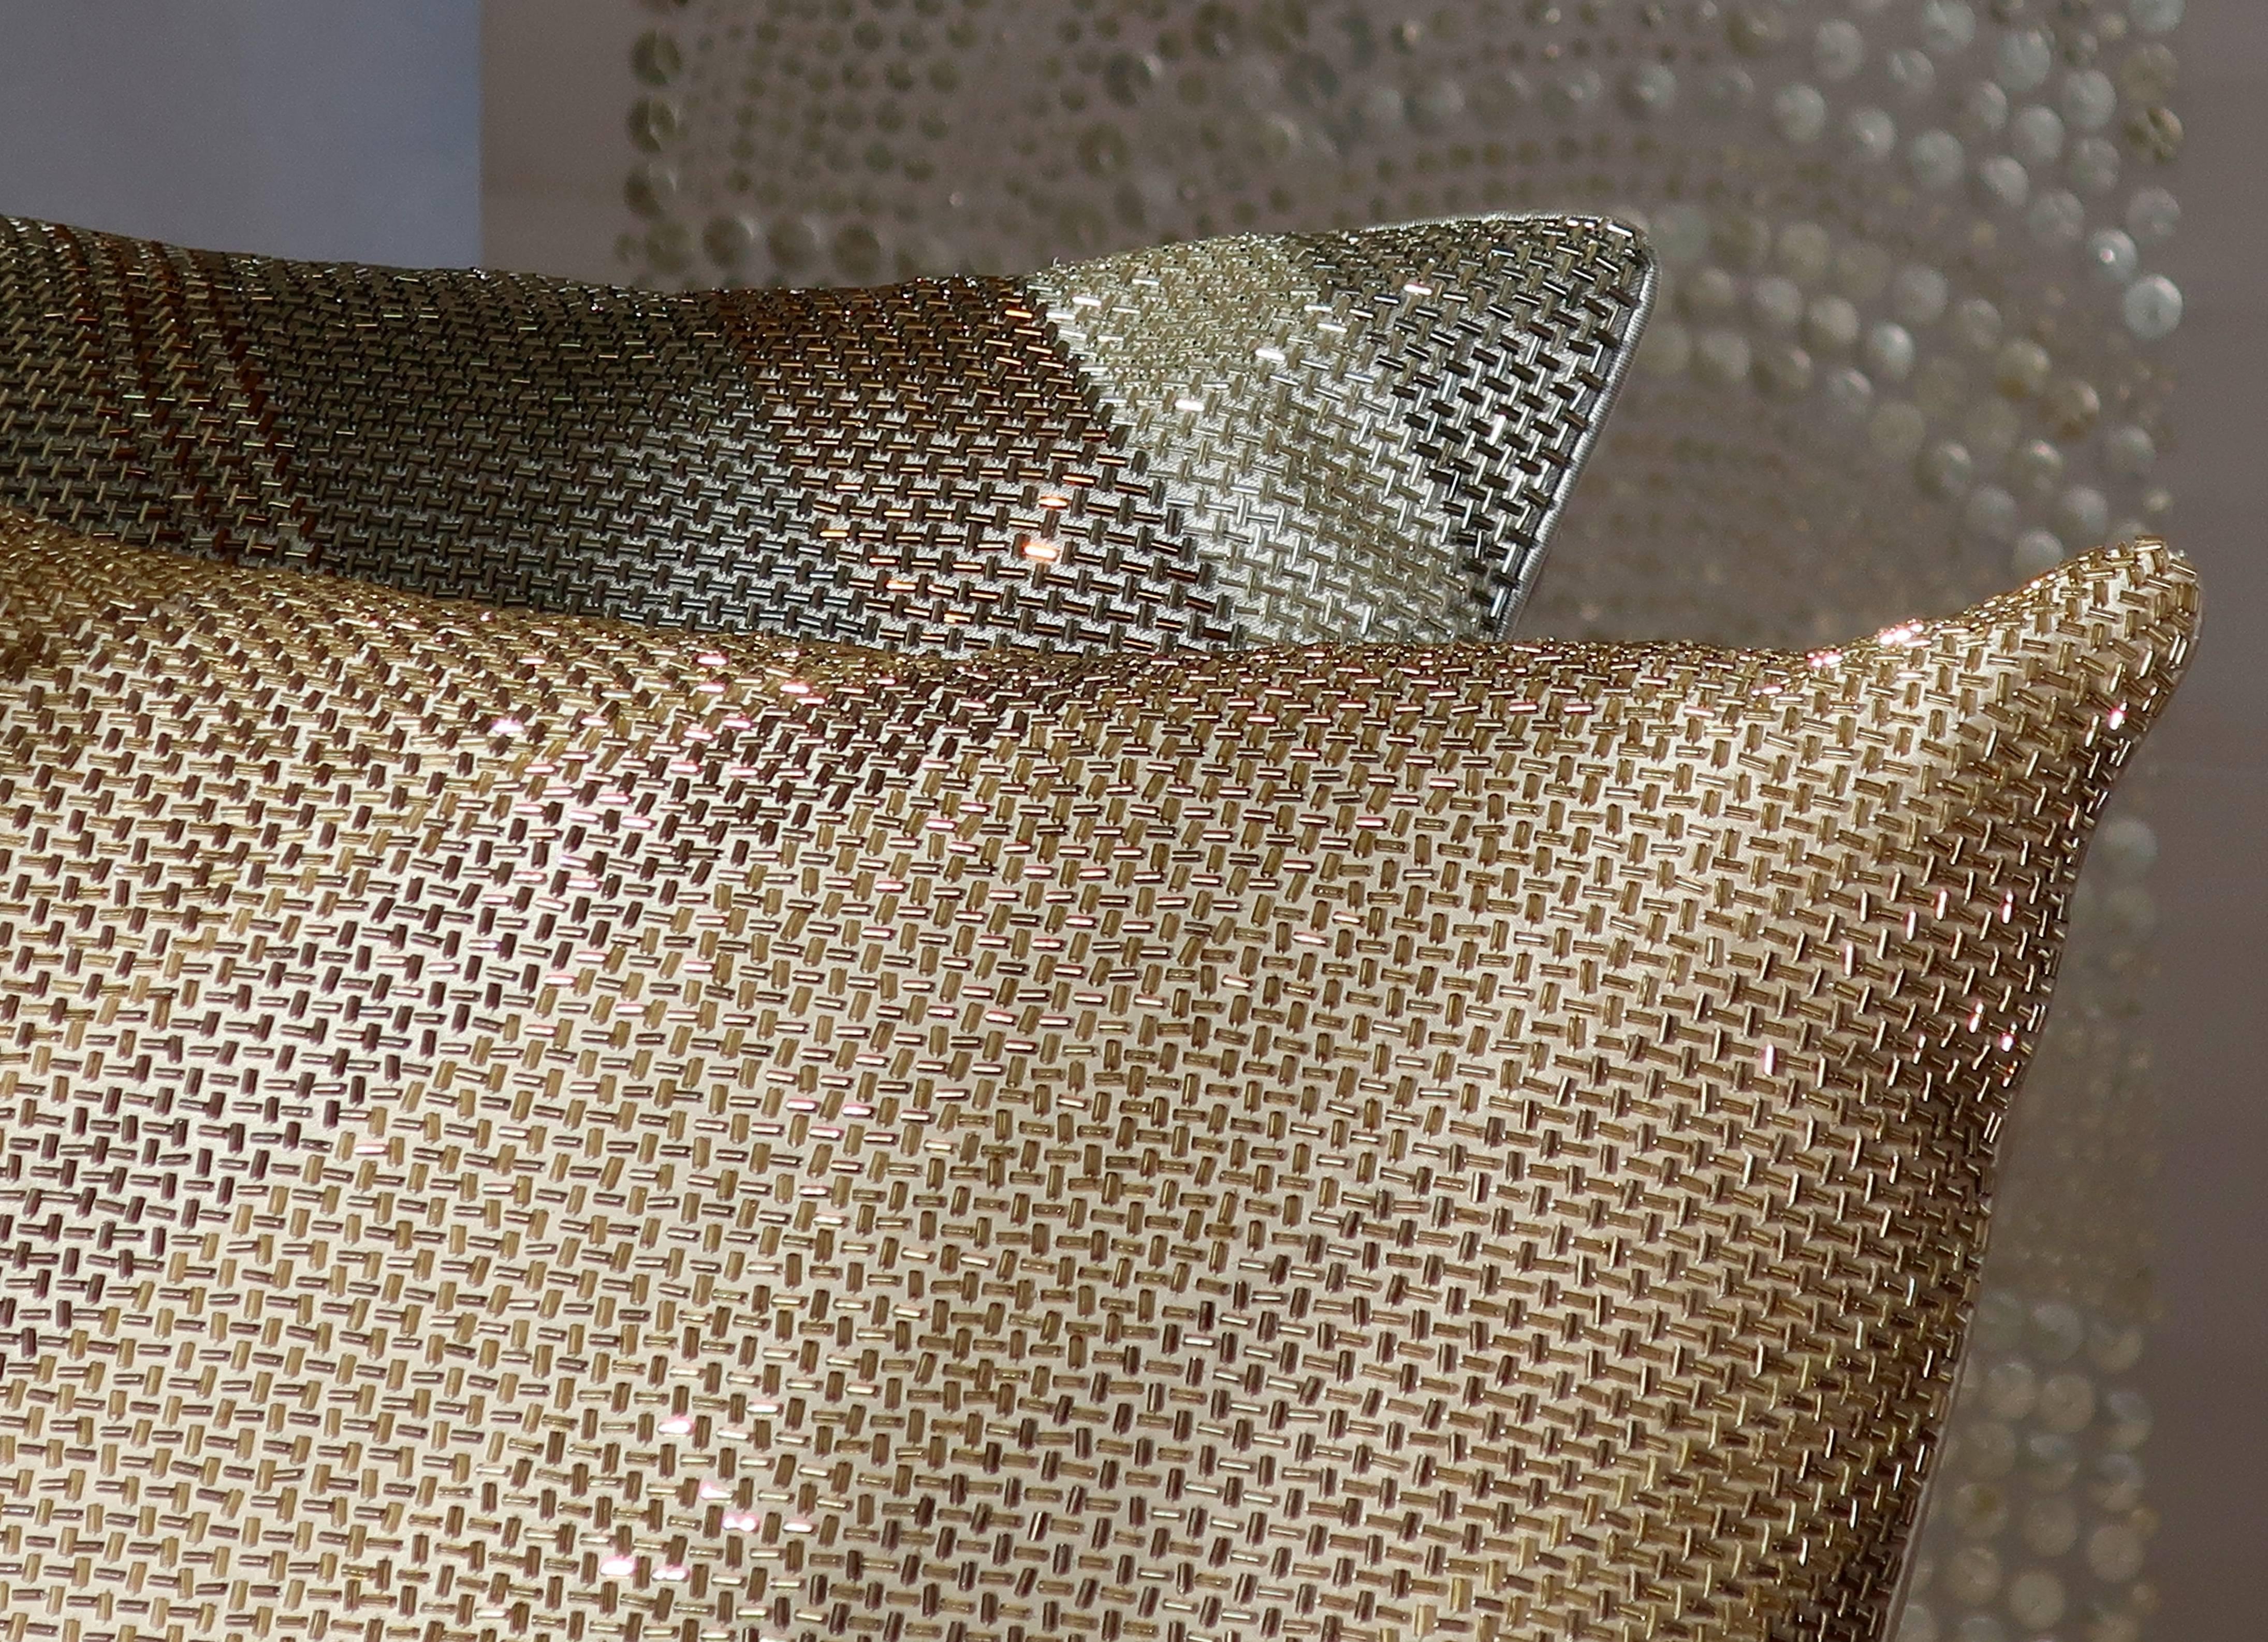 Handcrafted beaded pillow.
Diagonal grid design formed from glass bugle beads.
Shades of gold.
The play with color and position of color gives a subtle individuality to each pillow.
The lustre and reflection of light dancing on the metallic